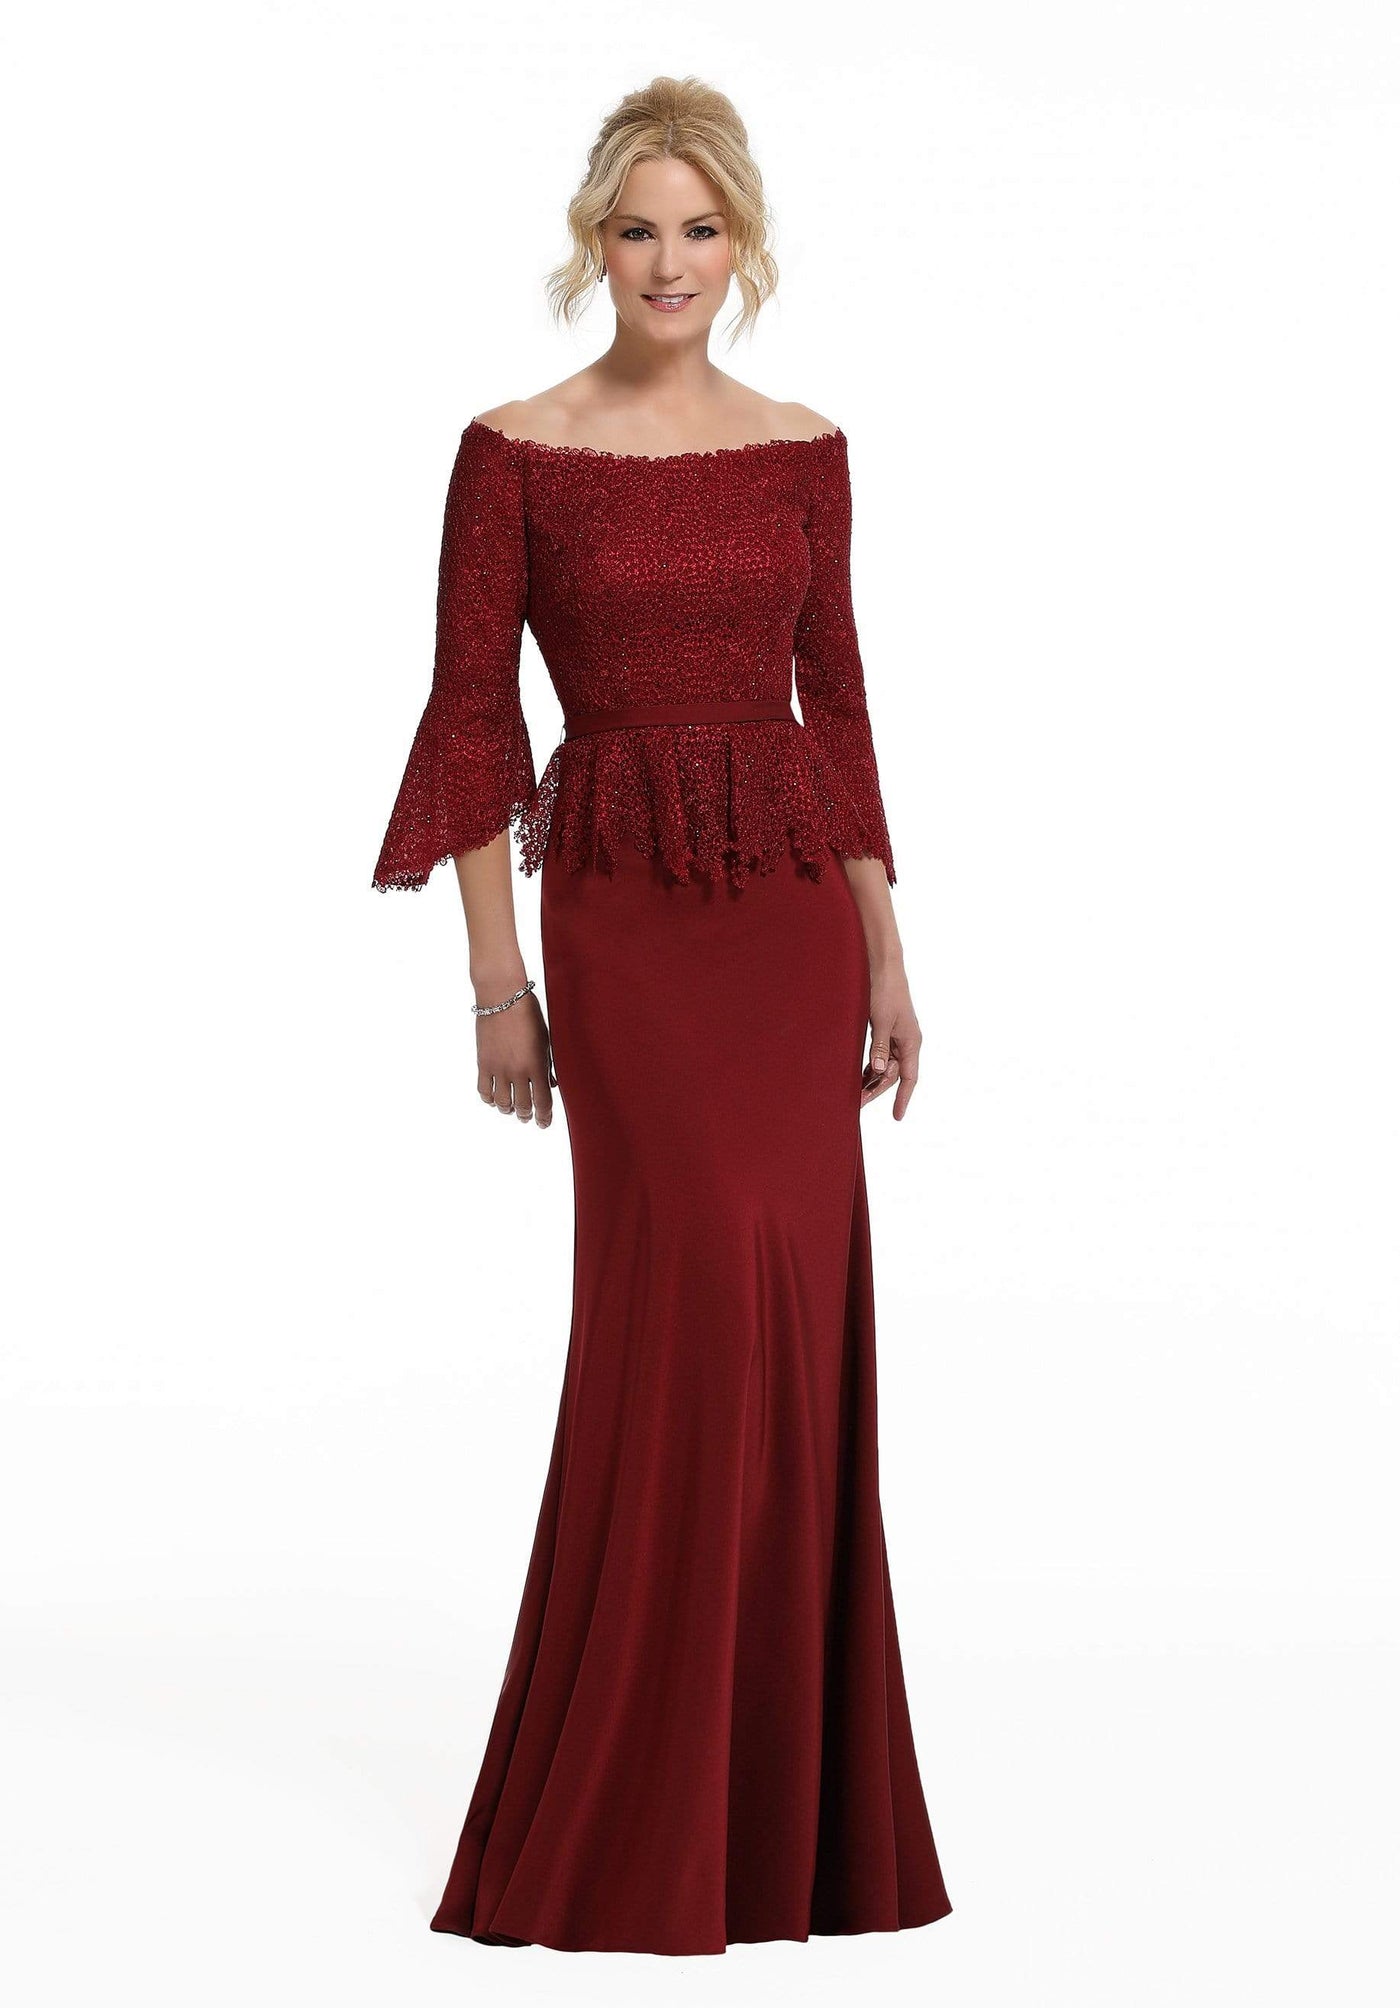 MGNY By Mori Lee - 72005 Beaded Off-Shoulder Dress with Peplum Mother of the Bride Dresses 0 / Wine